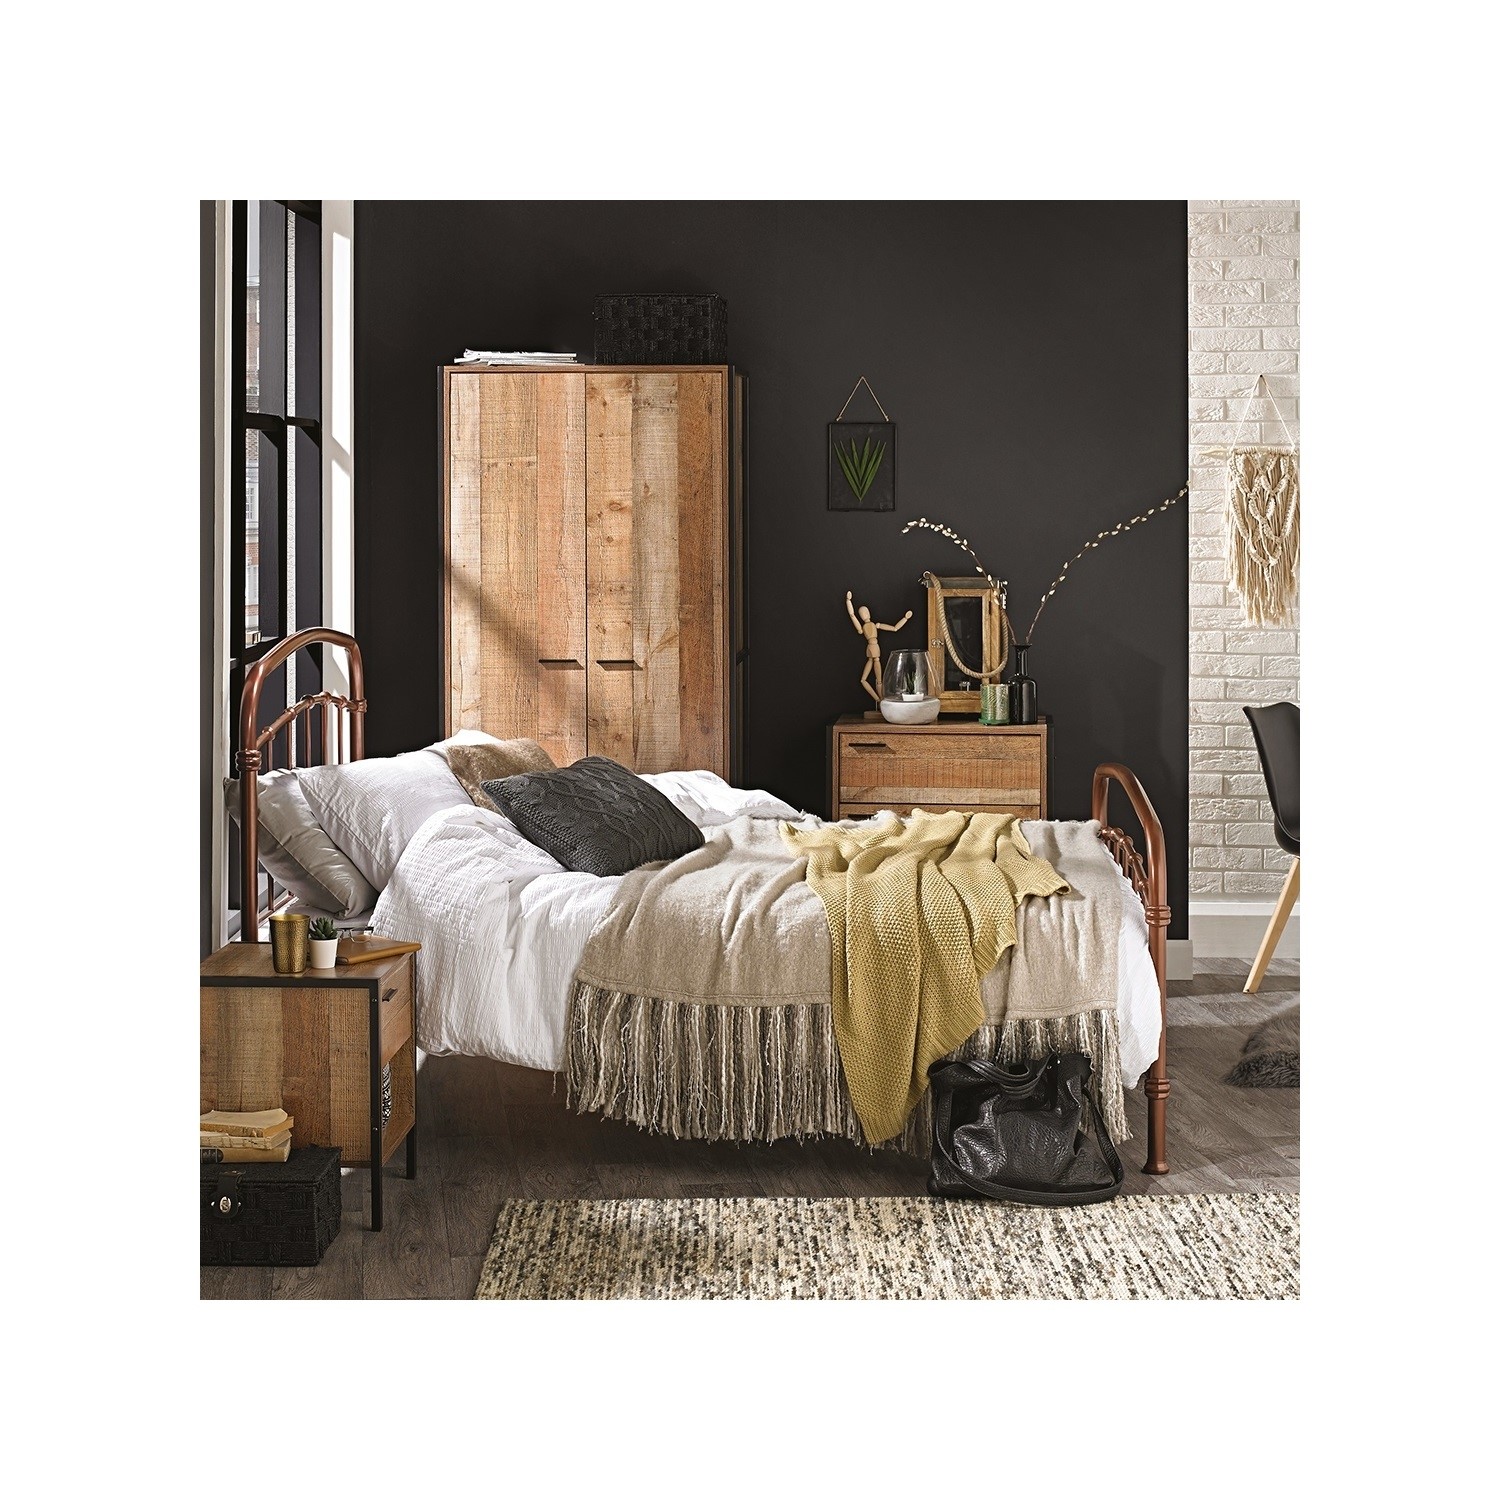 LPD Hoxton Rustic 3 Piece Bedroom Furniture Package